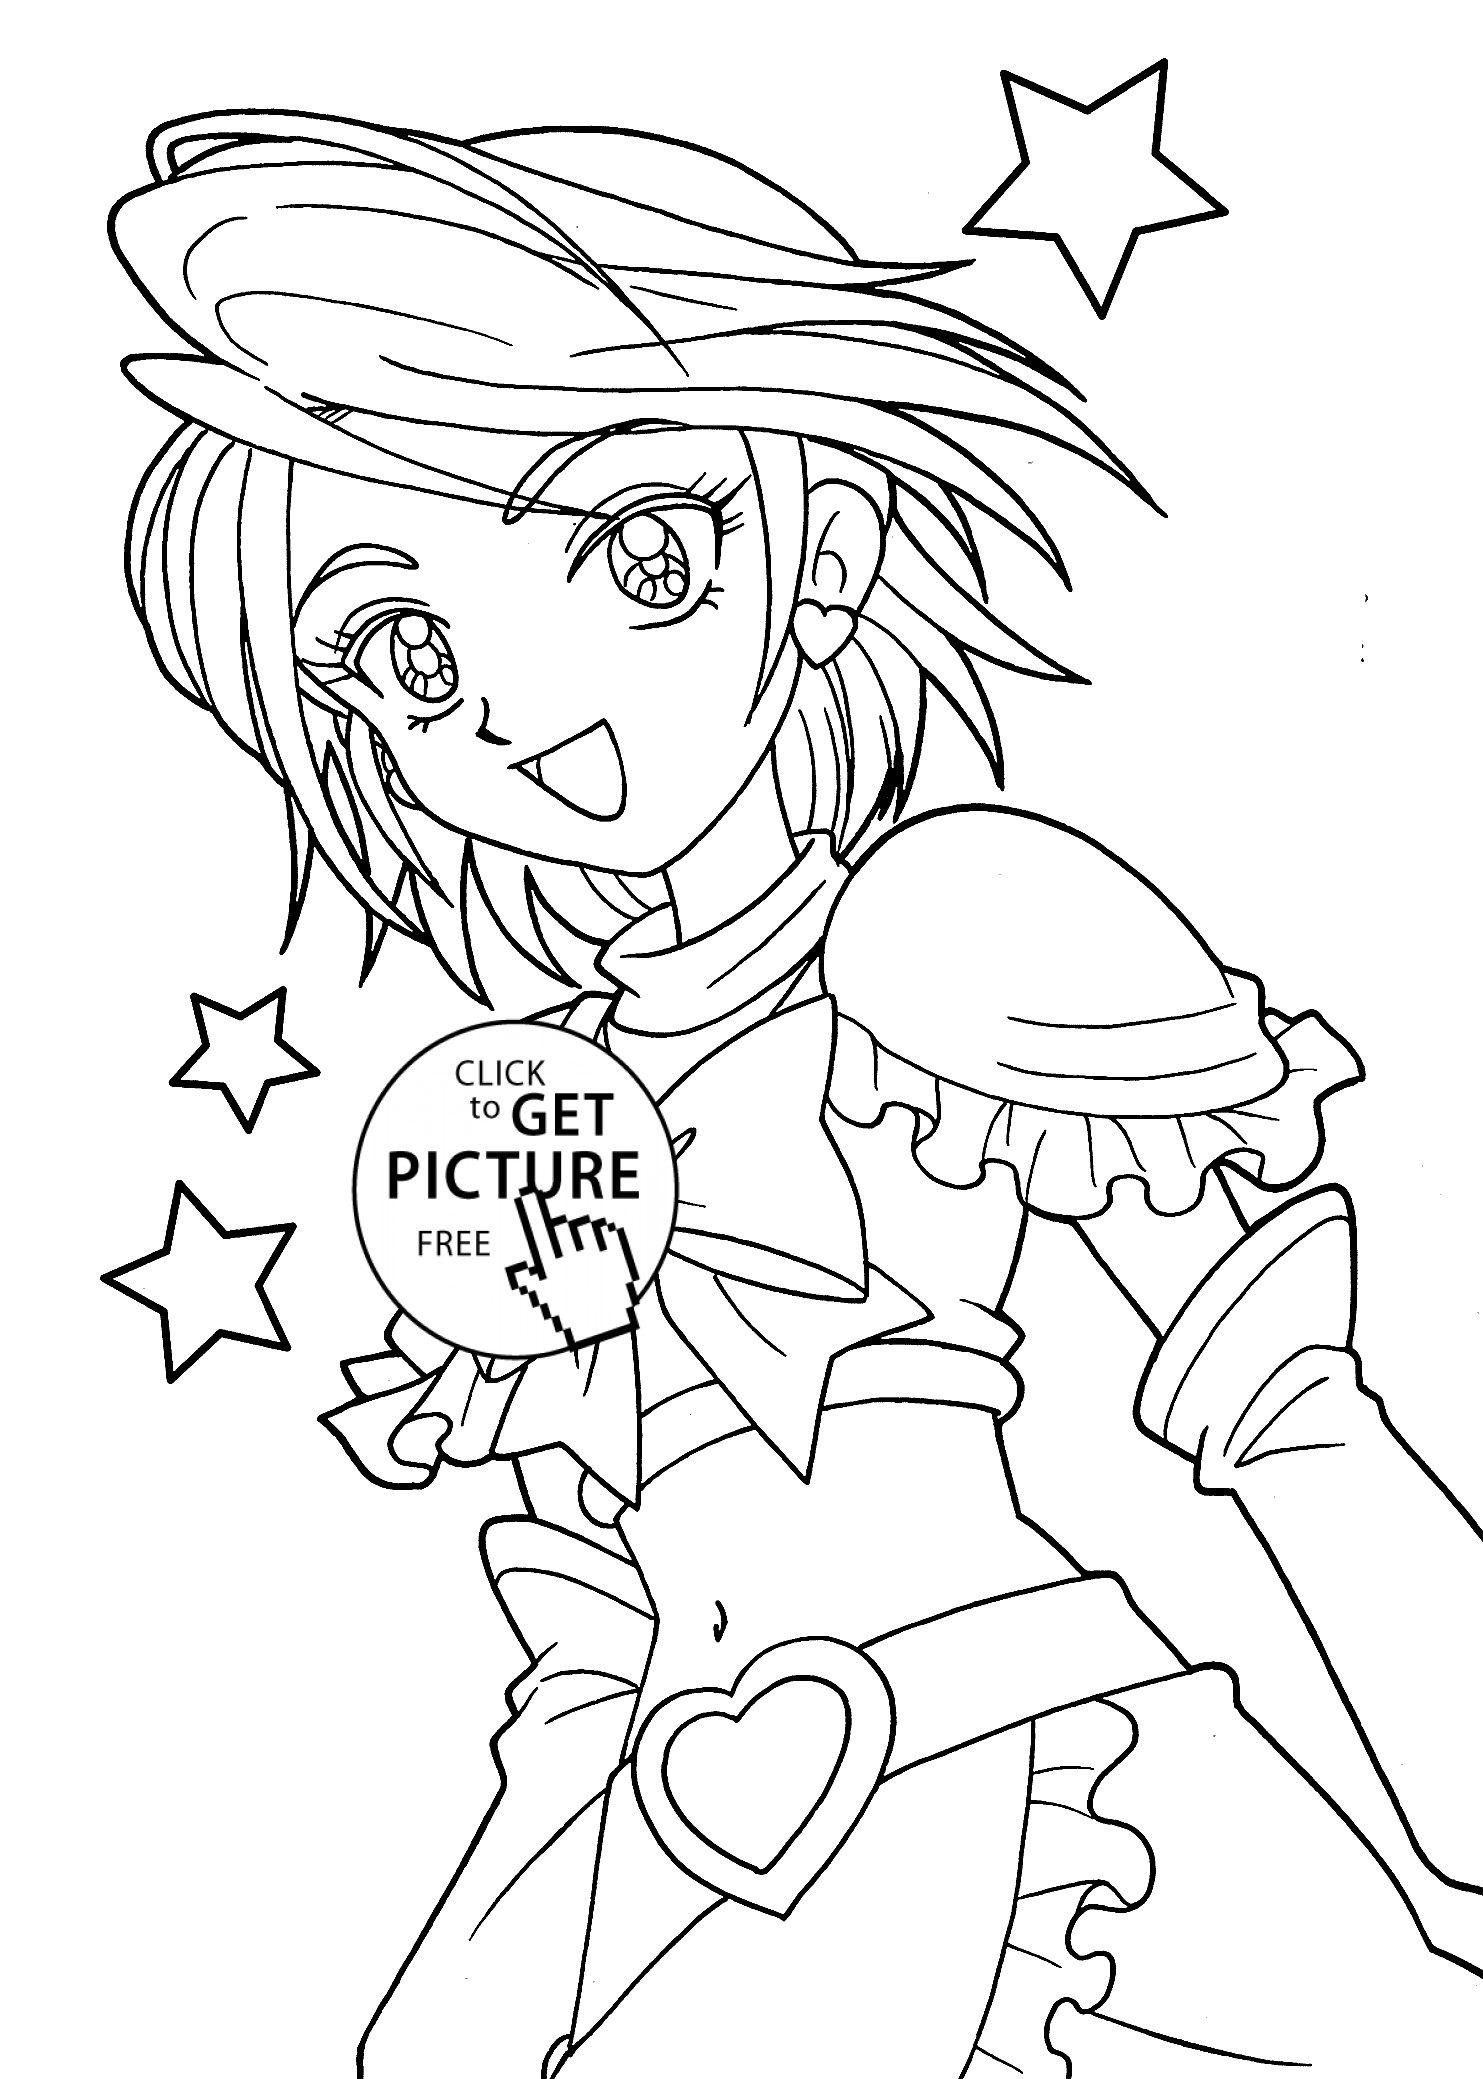 Coloring Book For Girls
 Pretty cure coloring pages for girls printable free